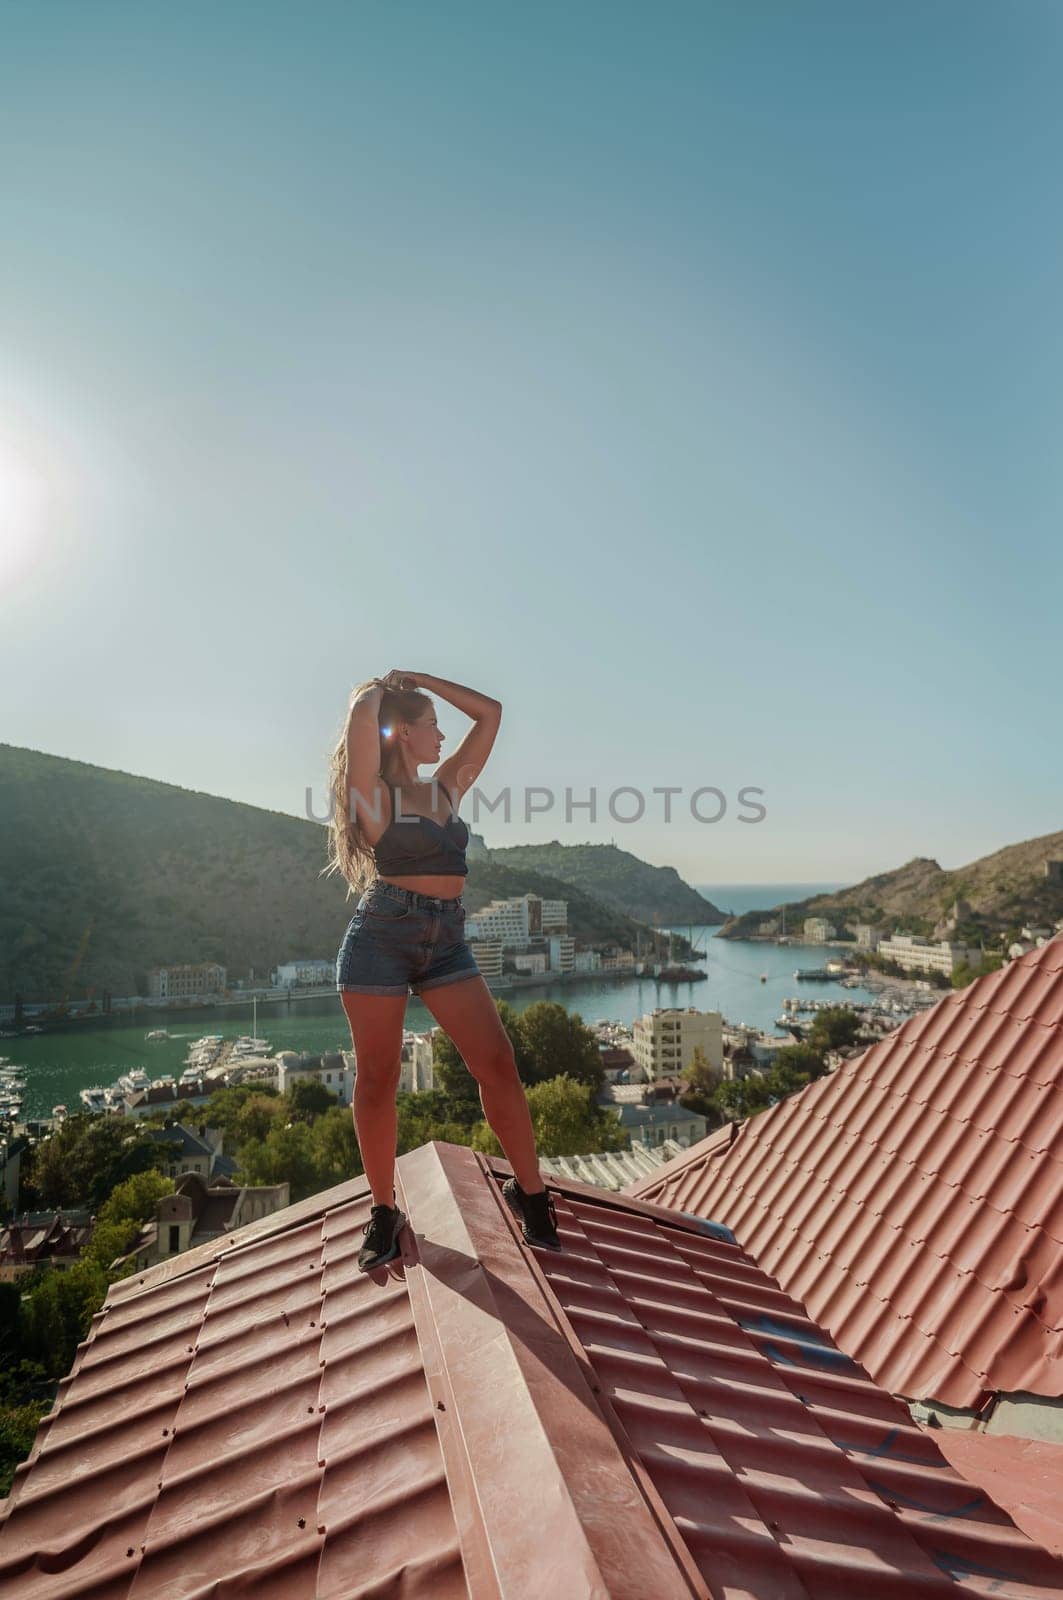 Woman standing on rooftop, enjoys town view and sea mountains. Peaceful rooftop relaxation. Below her, there is a town with several boats visible in the water. Rooftop vantage point